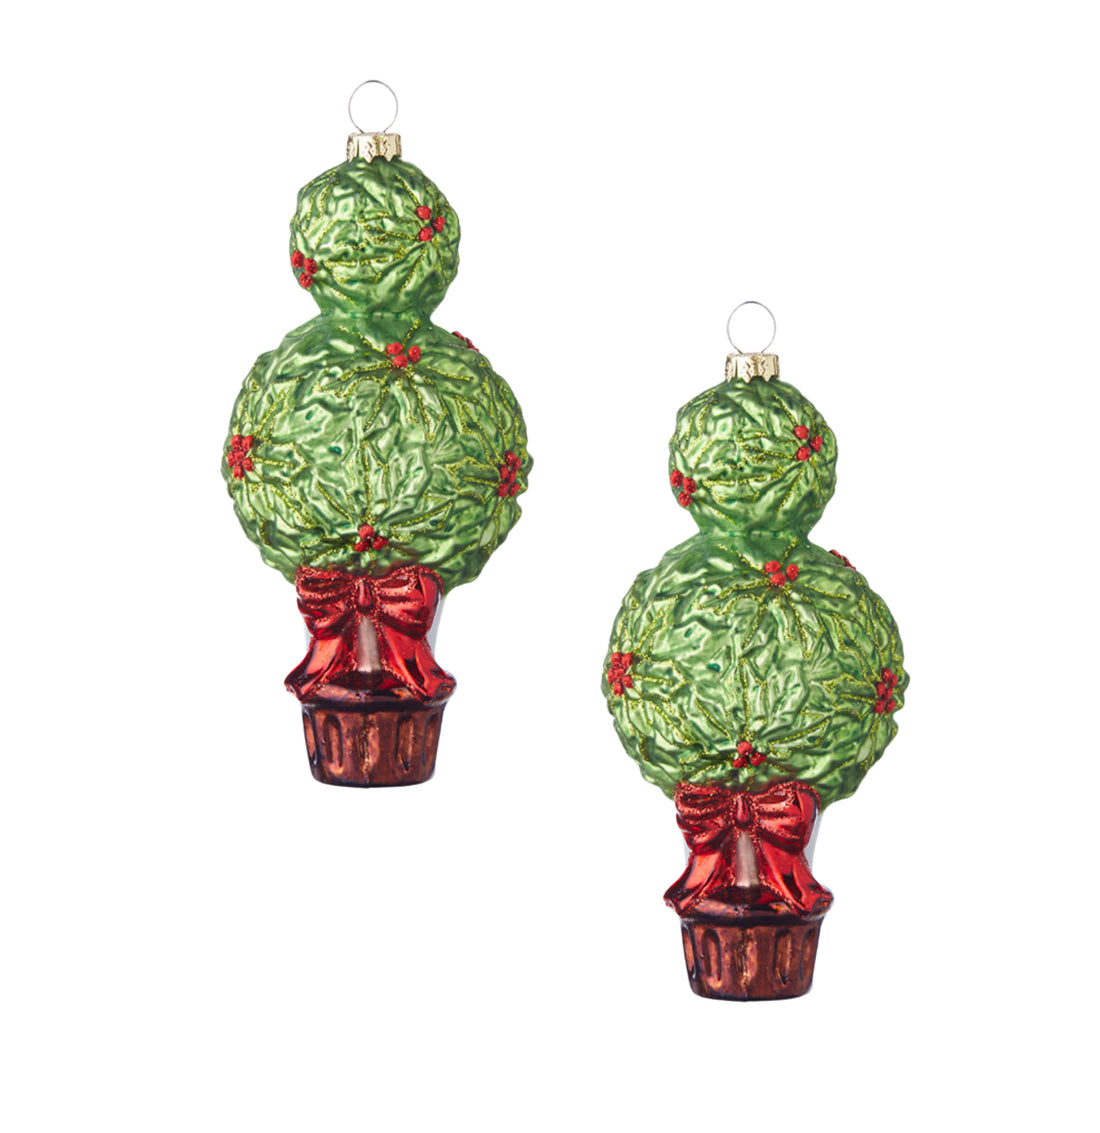 Glass topiary ornament set of 2